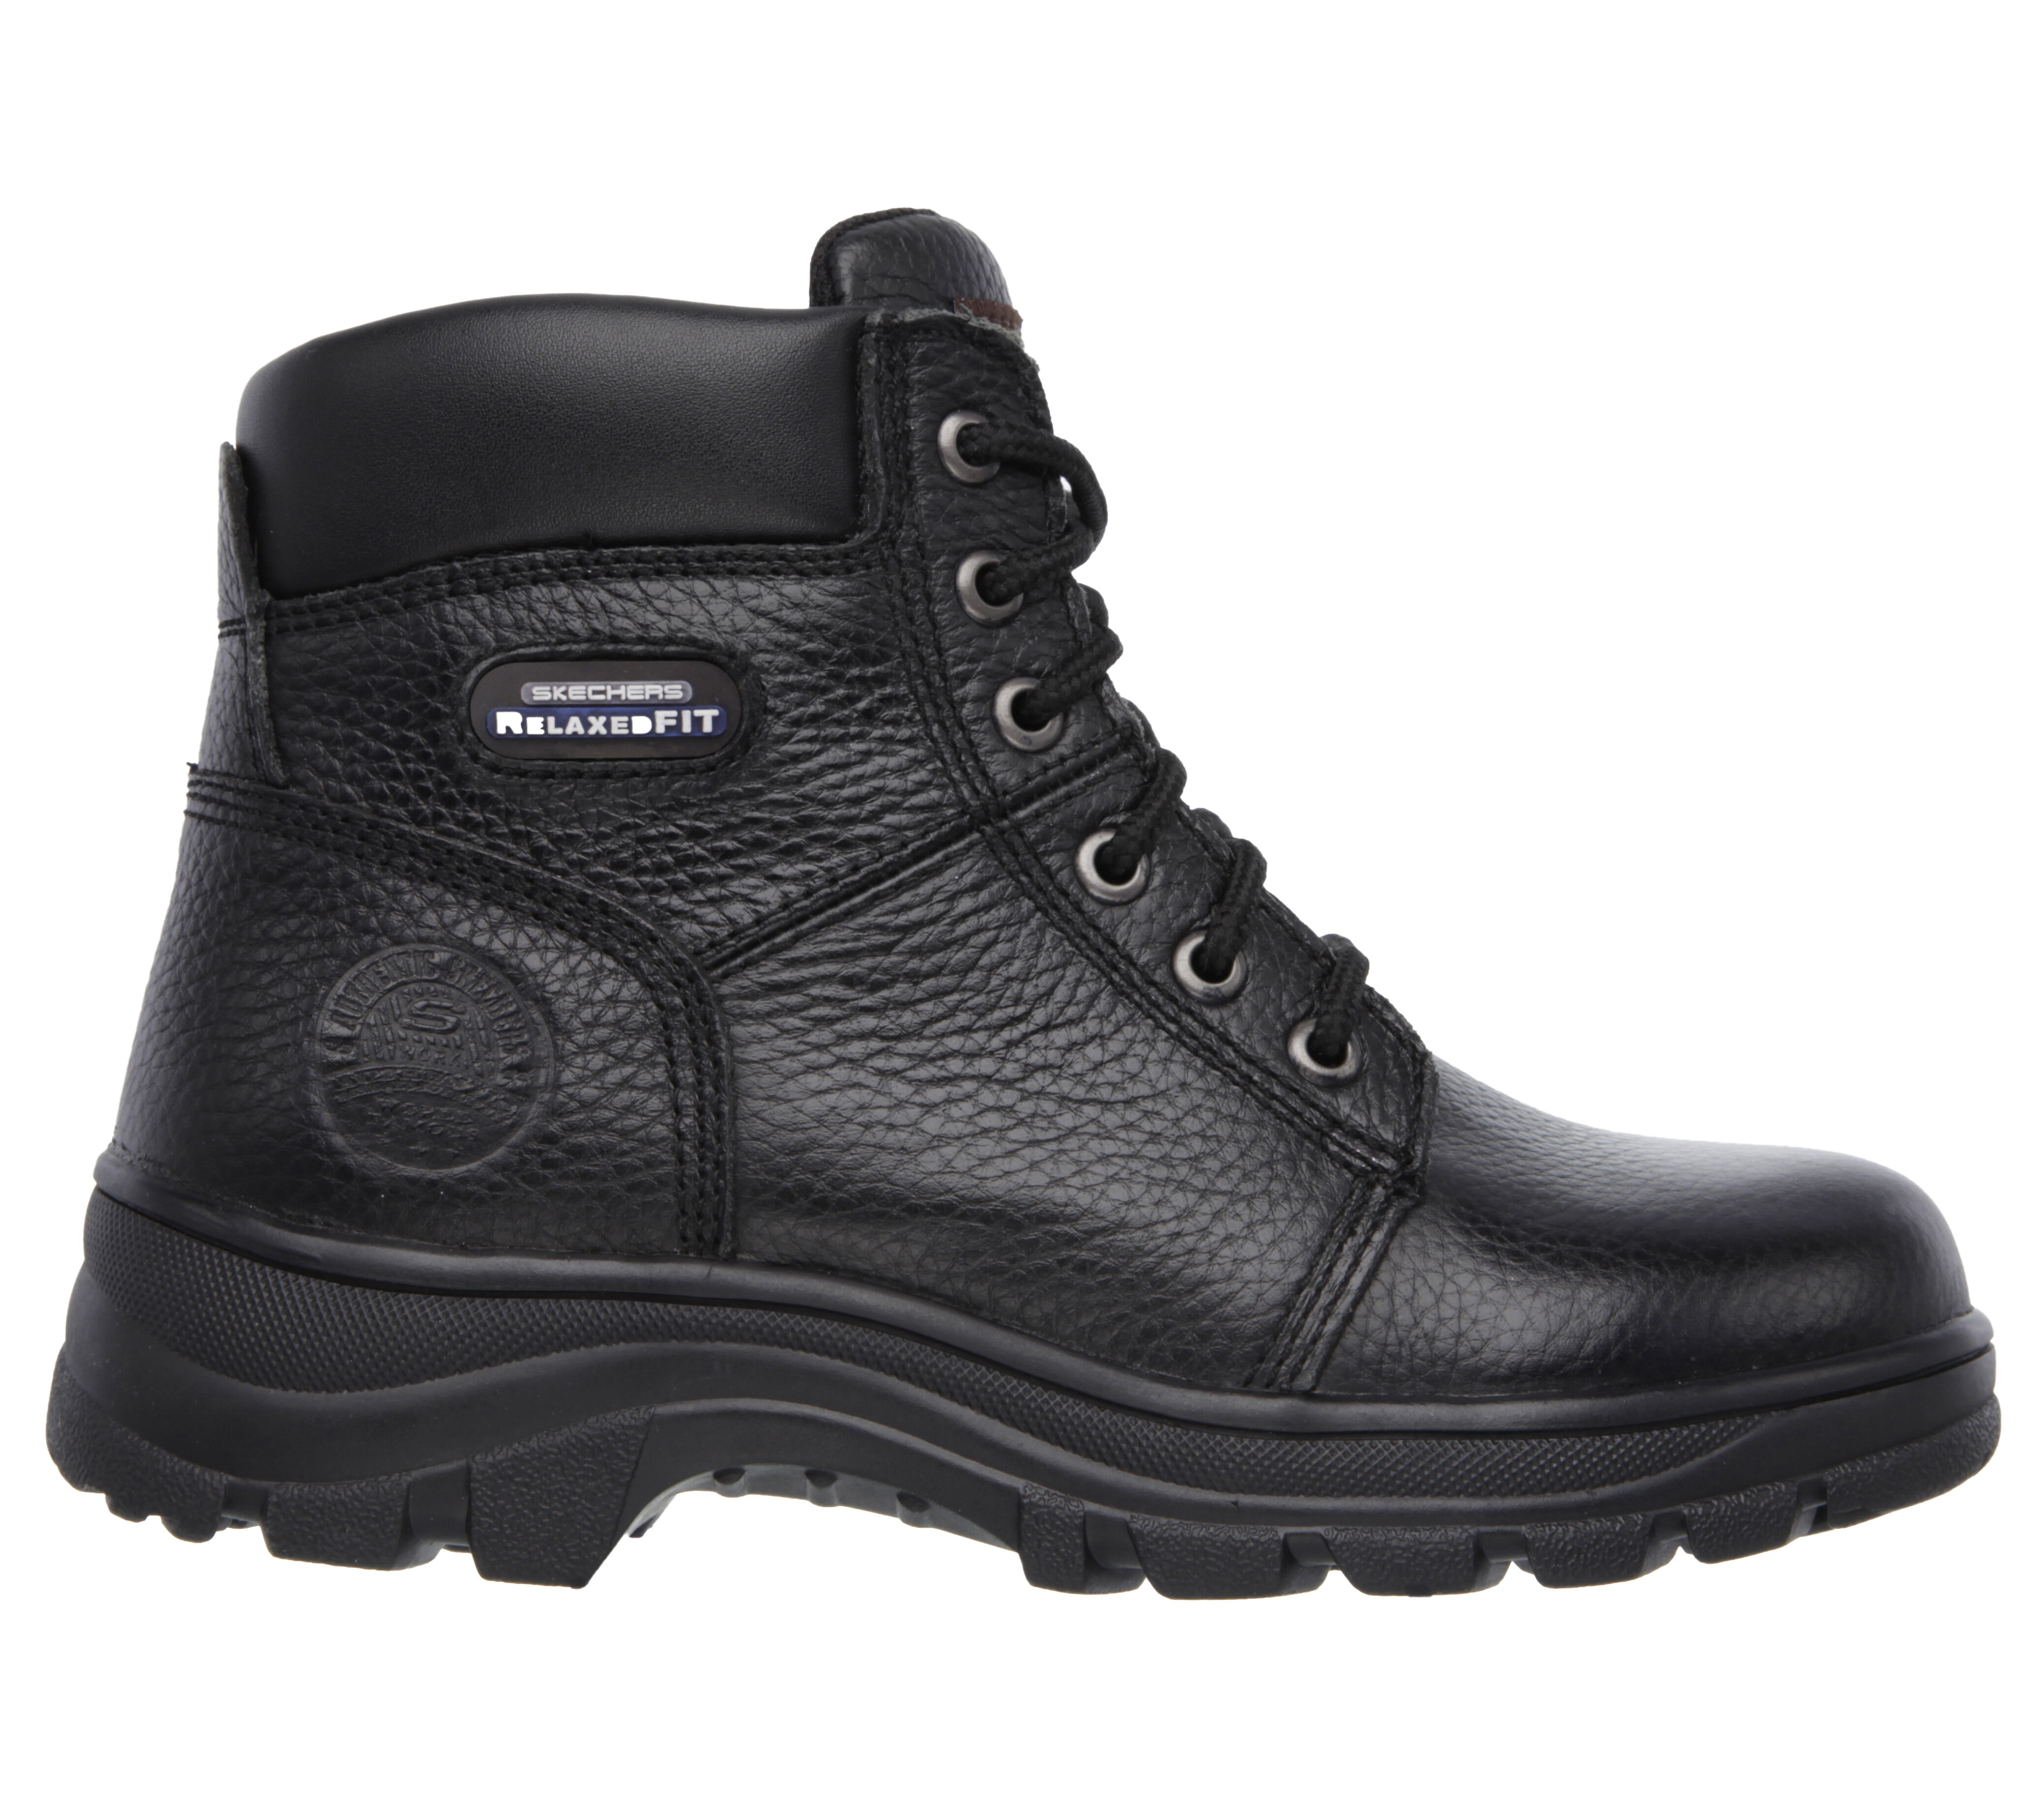 memory foam safety boots